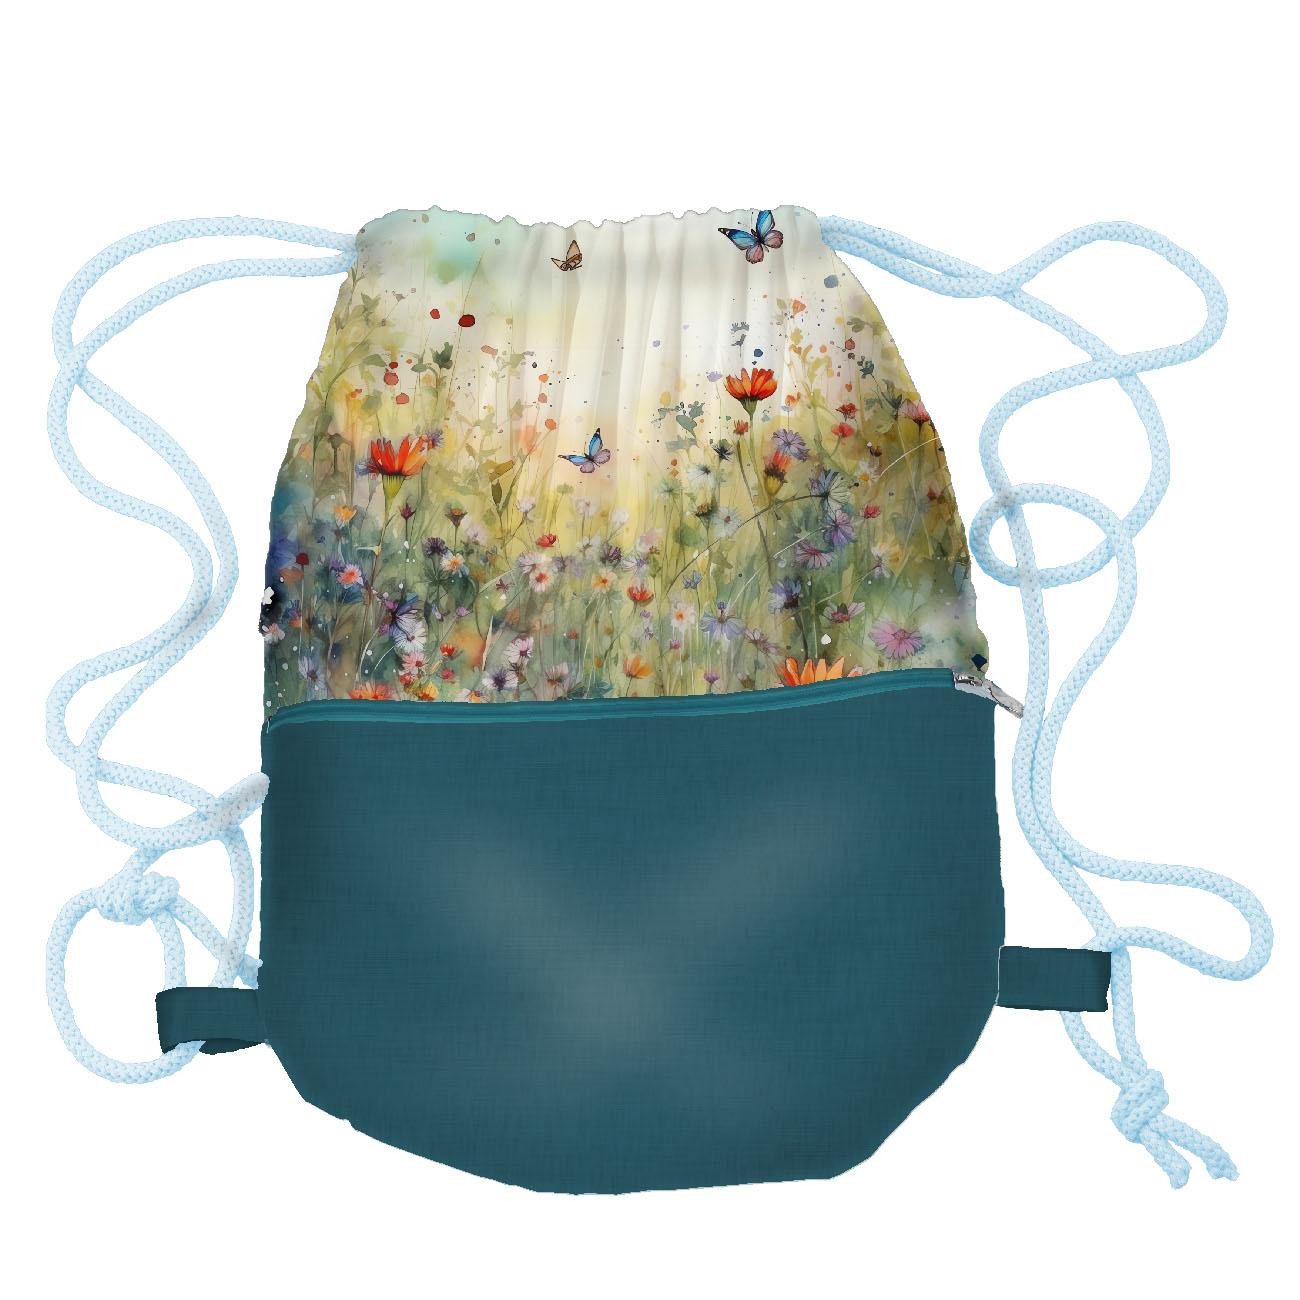 GYM BAG WITH POCKET - MAGIC MEADOW - sewing set